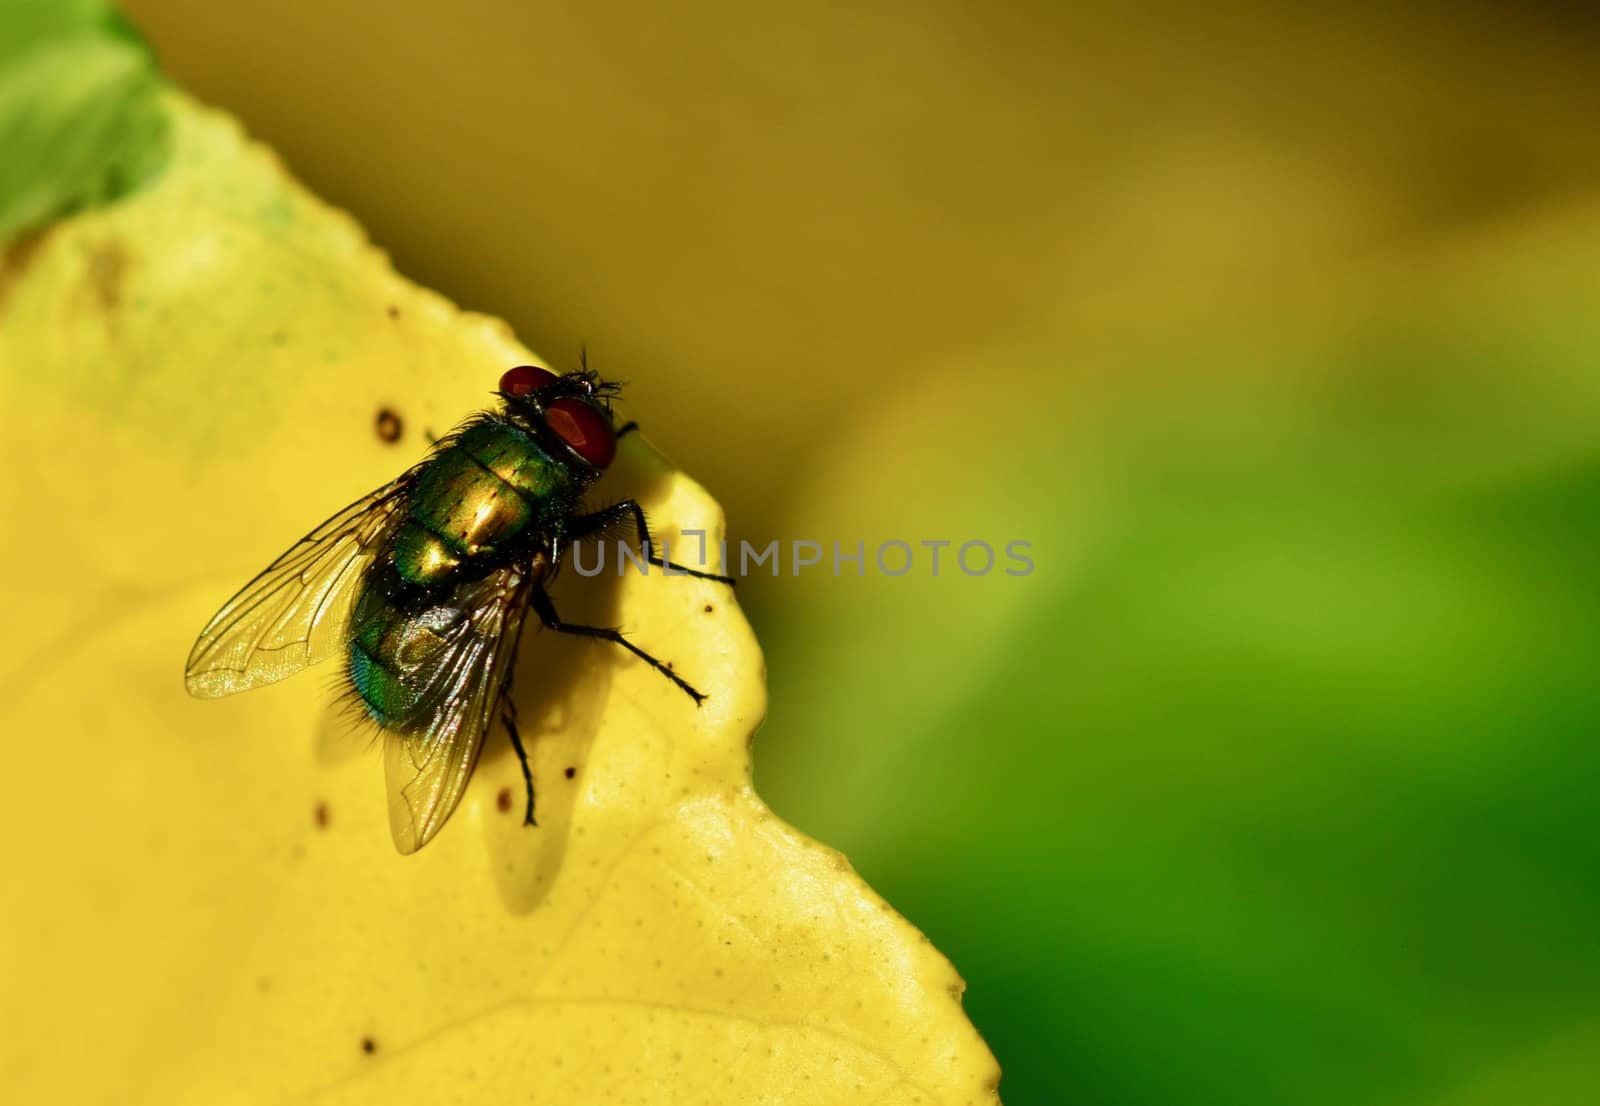 Macro of a common green bottle fly (Lucilia sericata), which is a blowfly found in most areas of the world. by Marshalkina